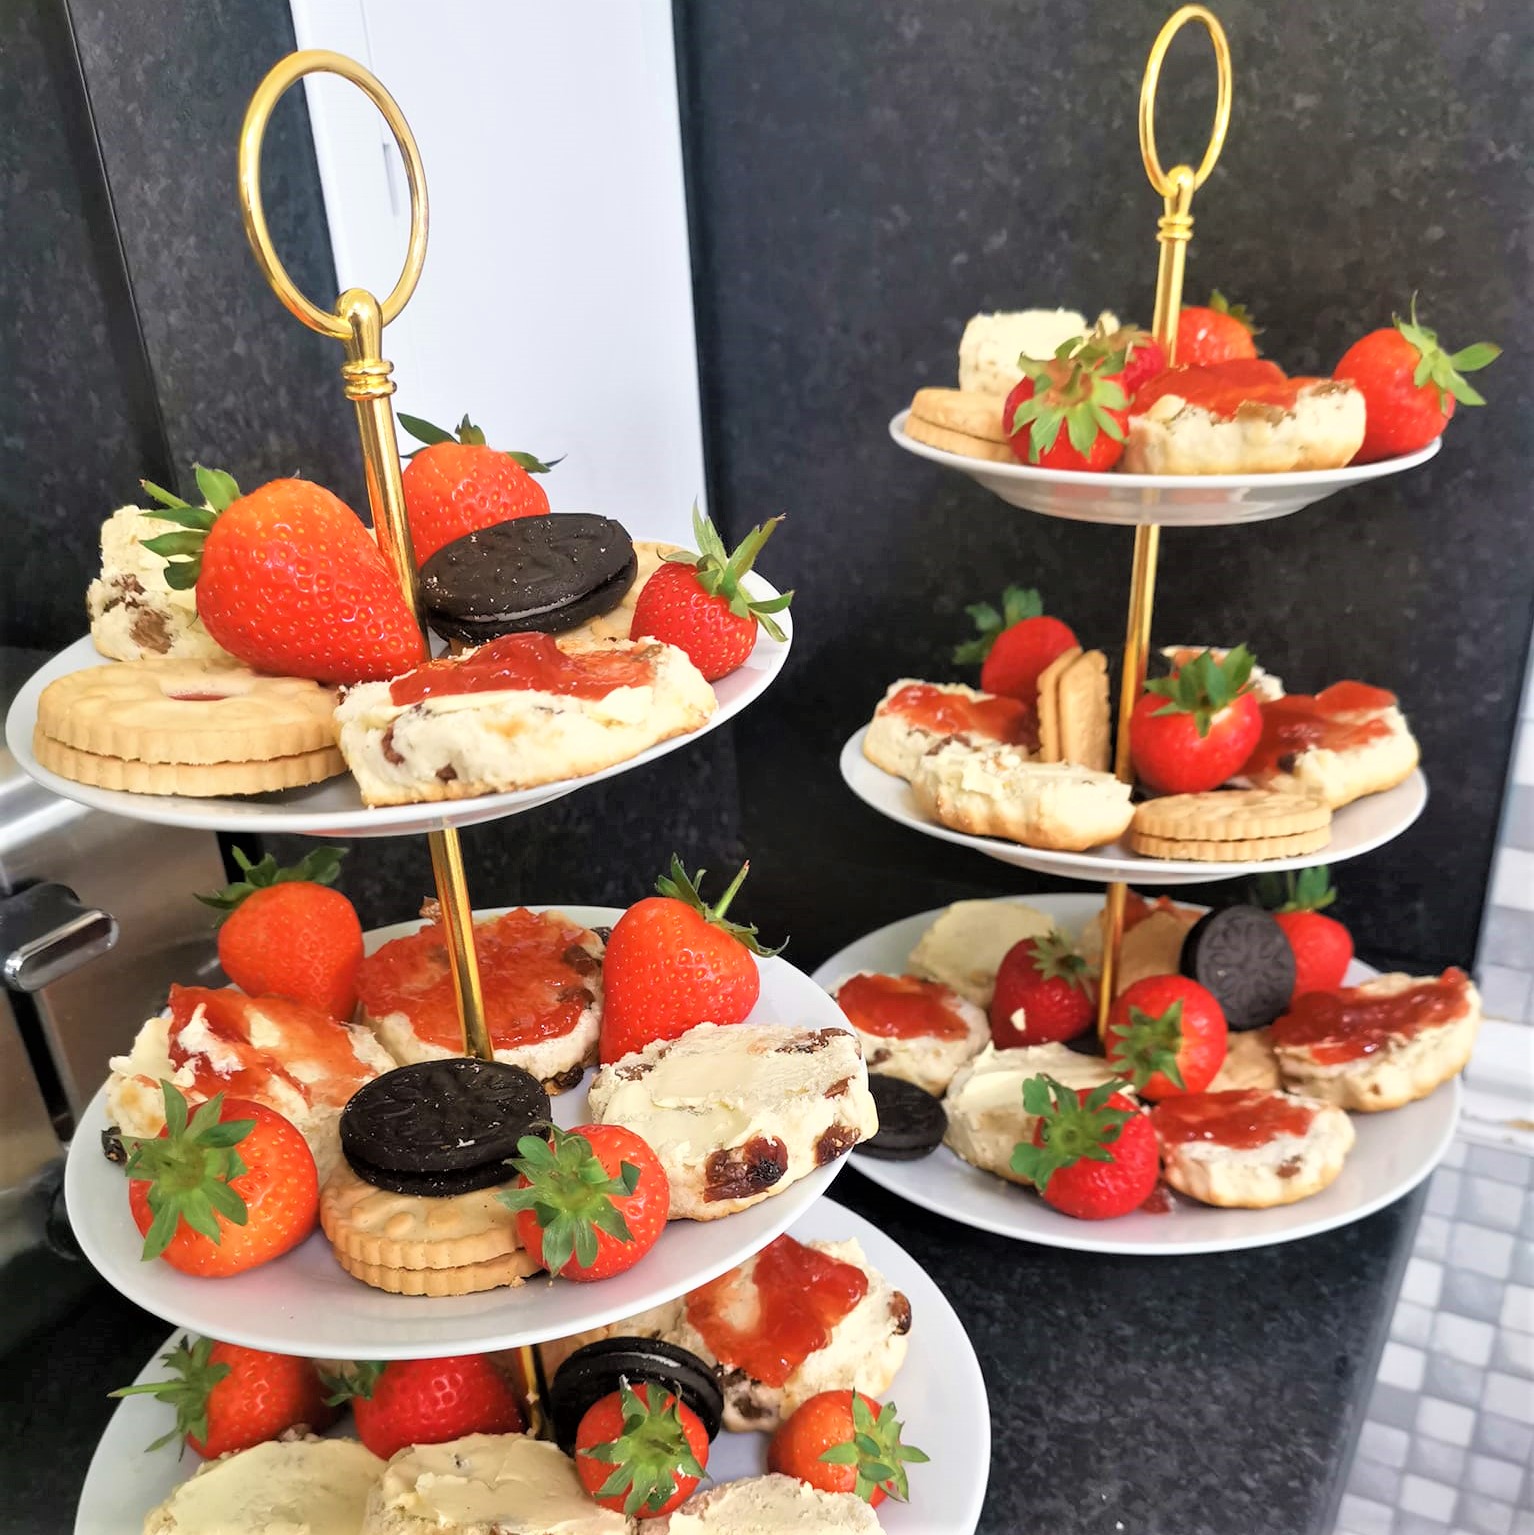 Clement Park afternoon tea tiered cake plates